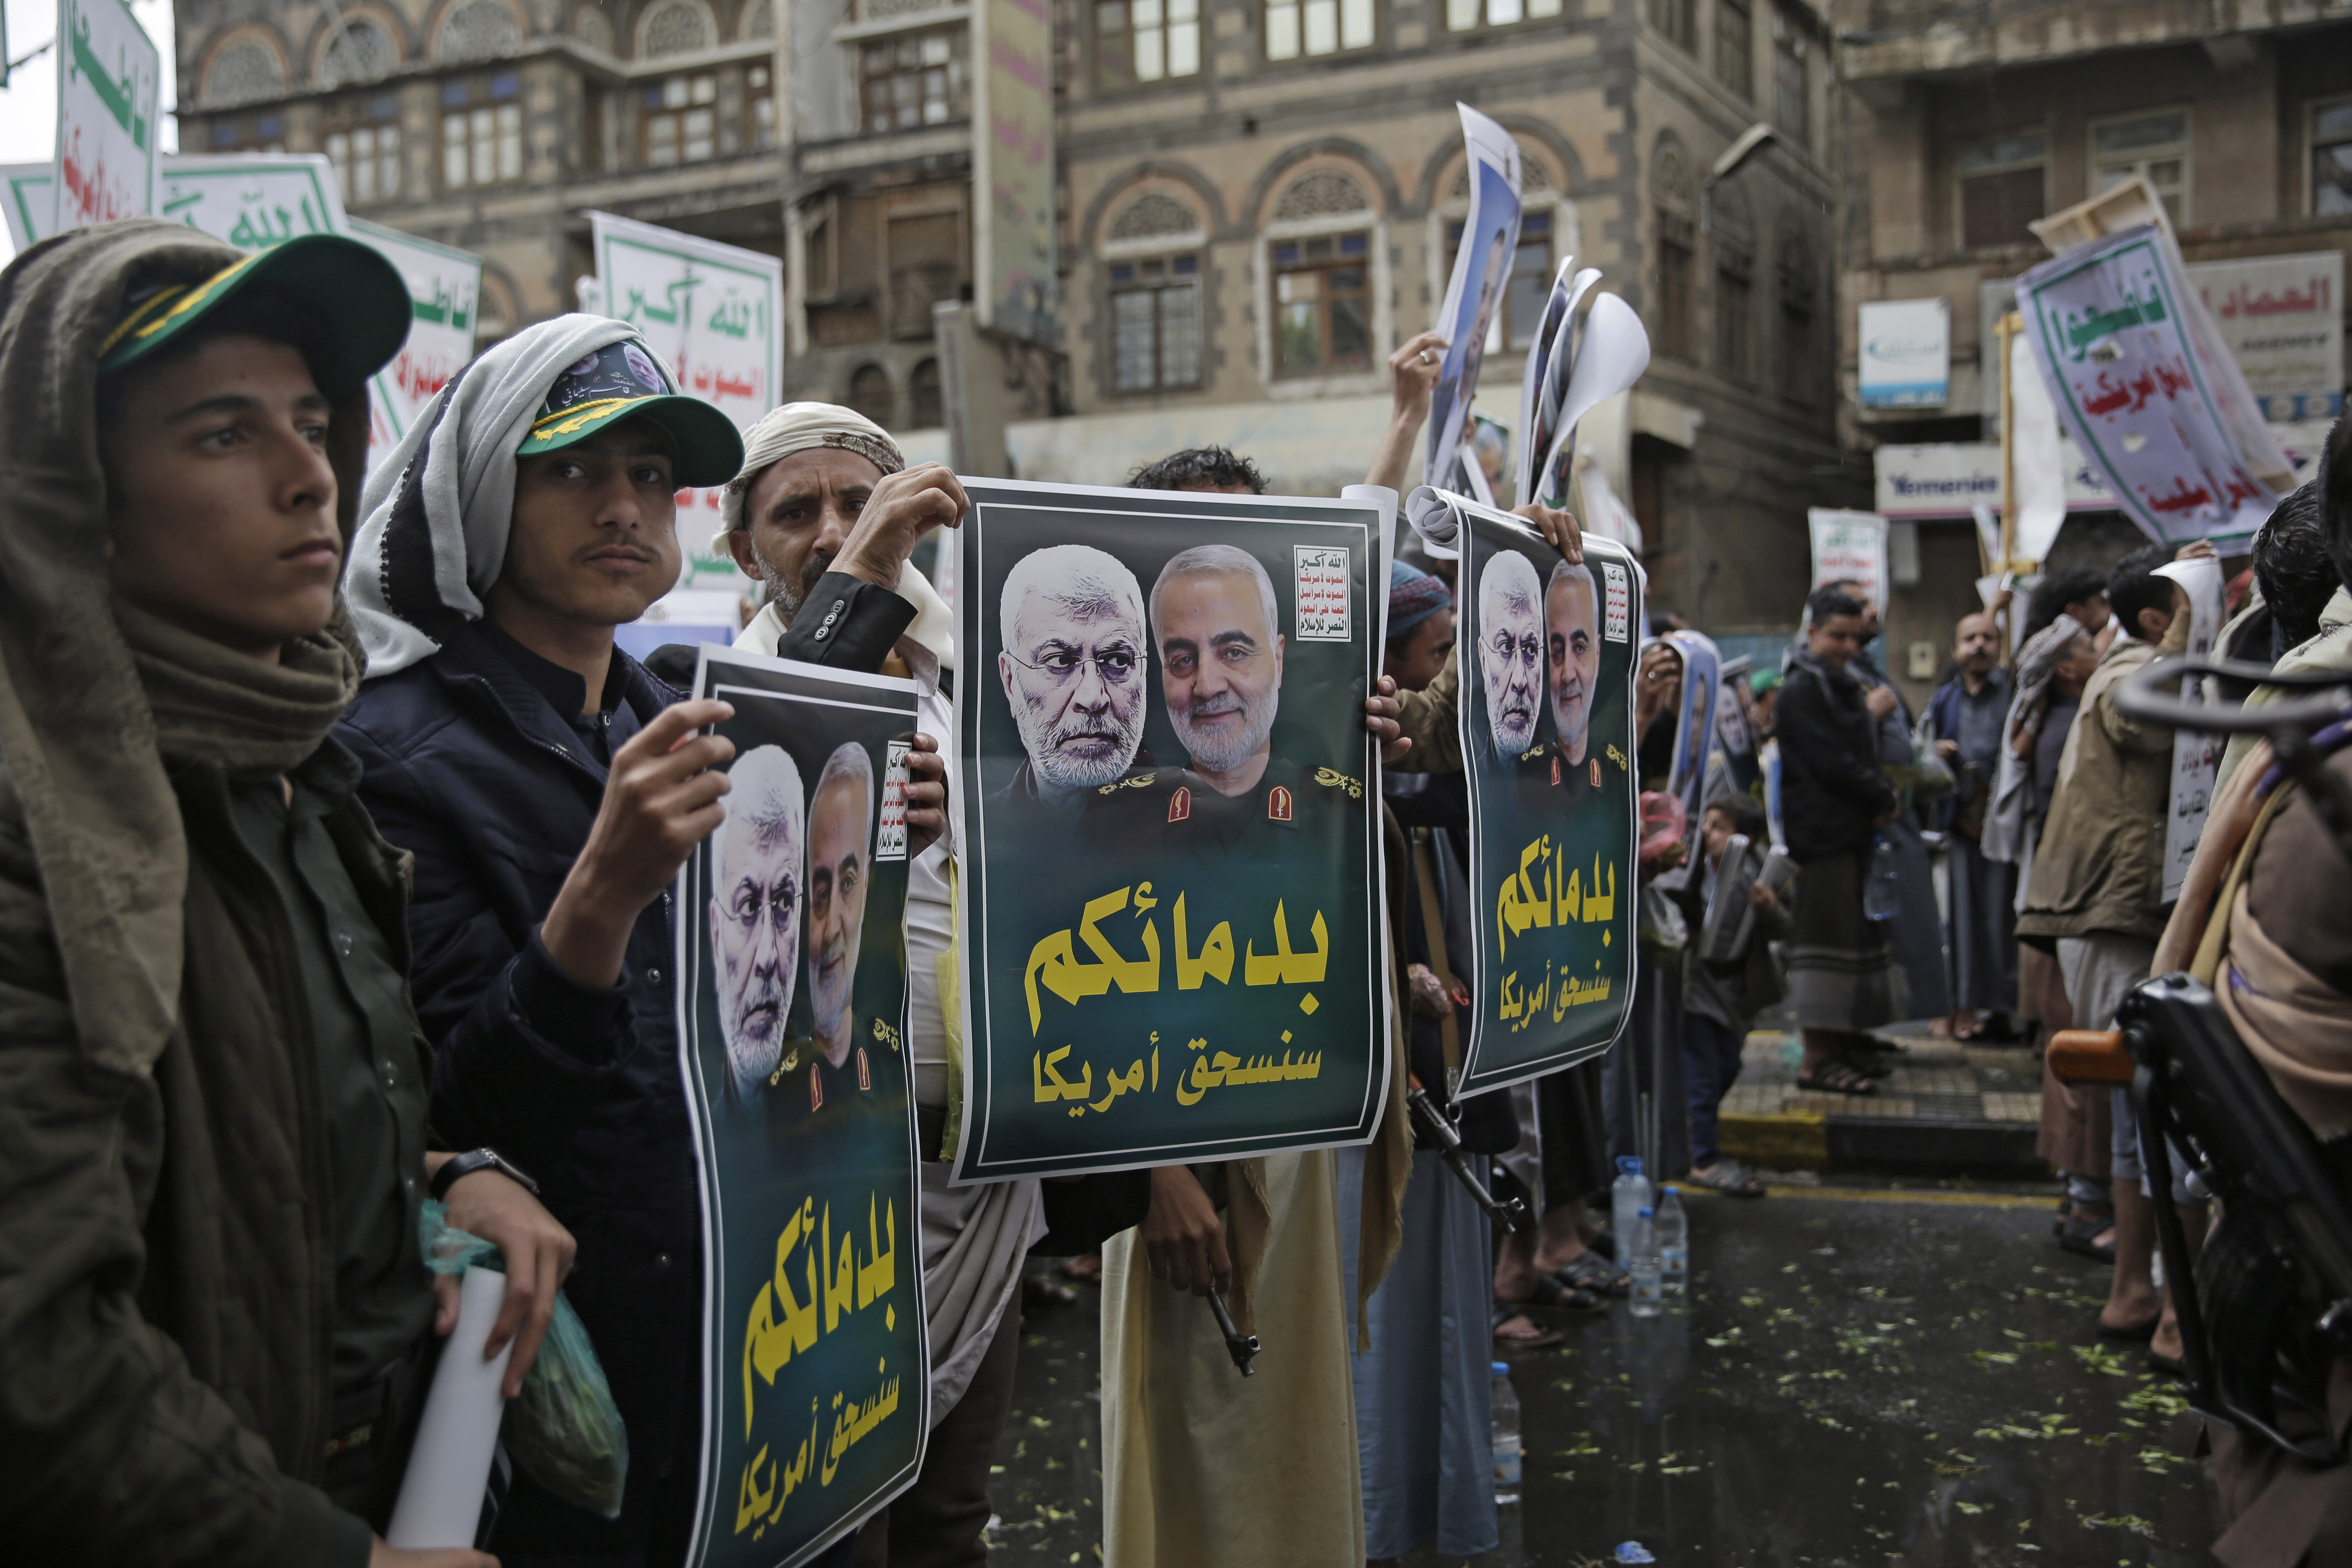 Yemeni Shiite Houthis hold posters of Iraqi militia commander Abu Mahdi al-Muhandis, left, and Iranian military commander Qassem Soleimani during a protest against a U.S. airstrike in Iraq that killed of both commanders, in Sanaa, Yemen, Monday, Jan. 6, 2020. Arabic writing on posters reads, 